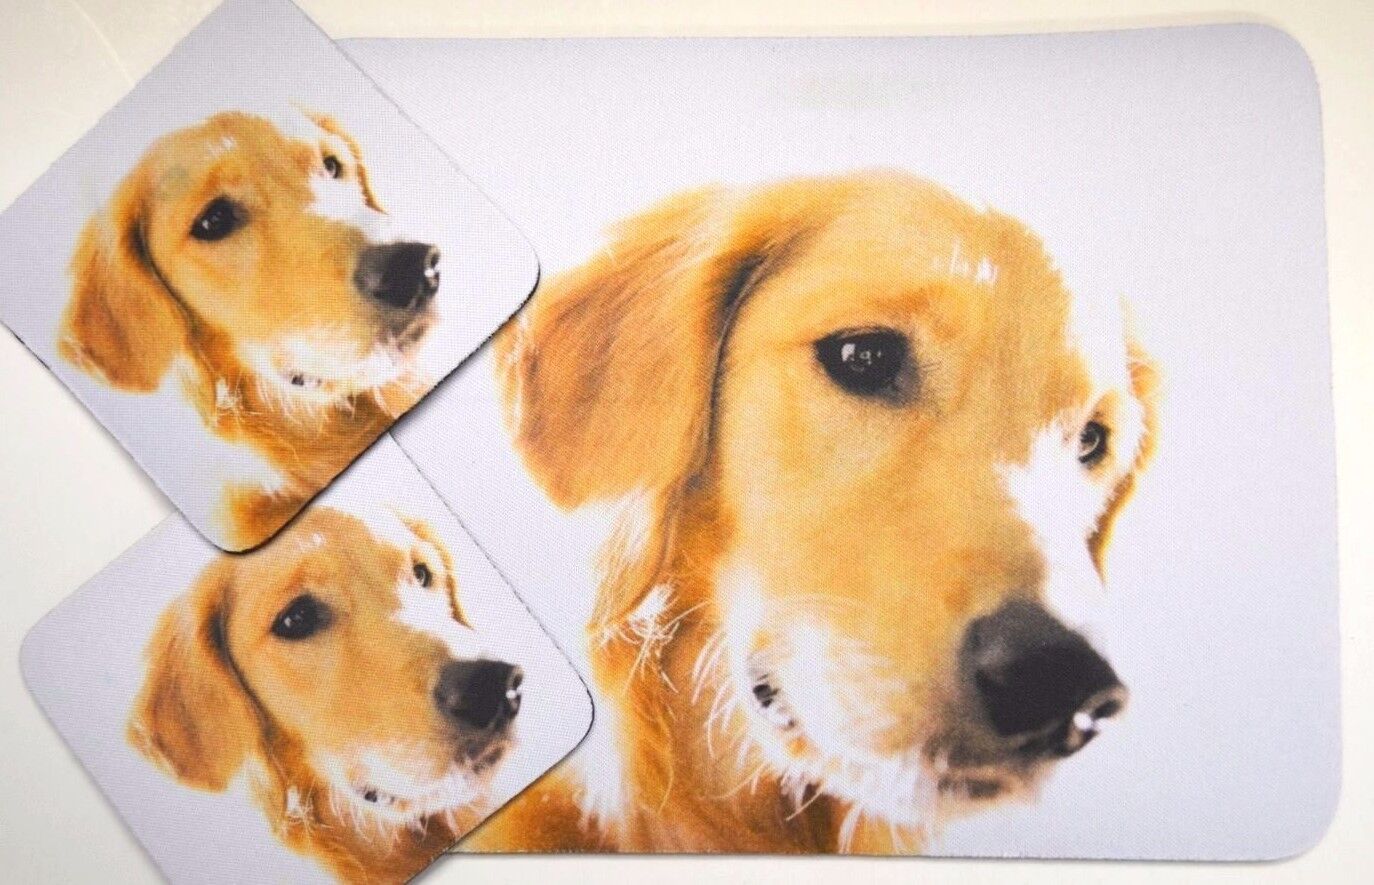 3 pc Set Dog Lover Mouse Pad 9x7 +2 Coasters GOLDEN RETRIEVER Puppies Nice Gift